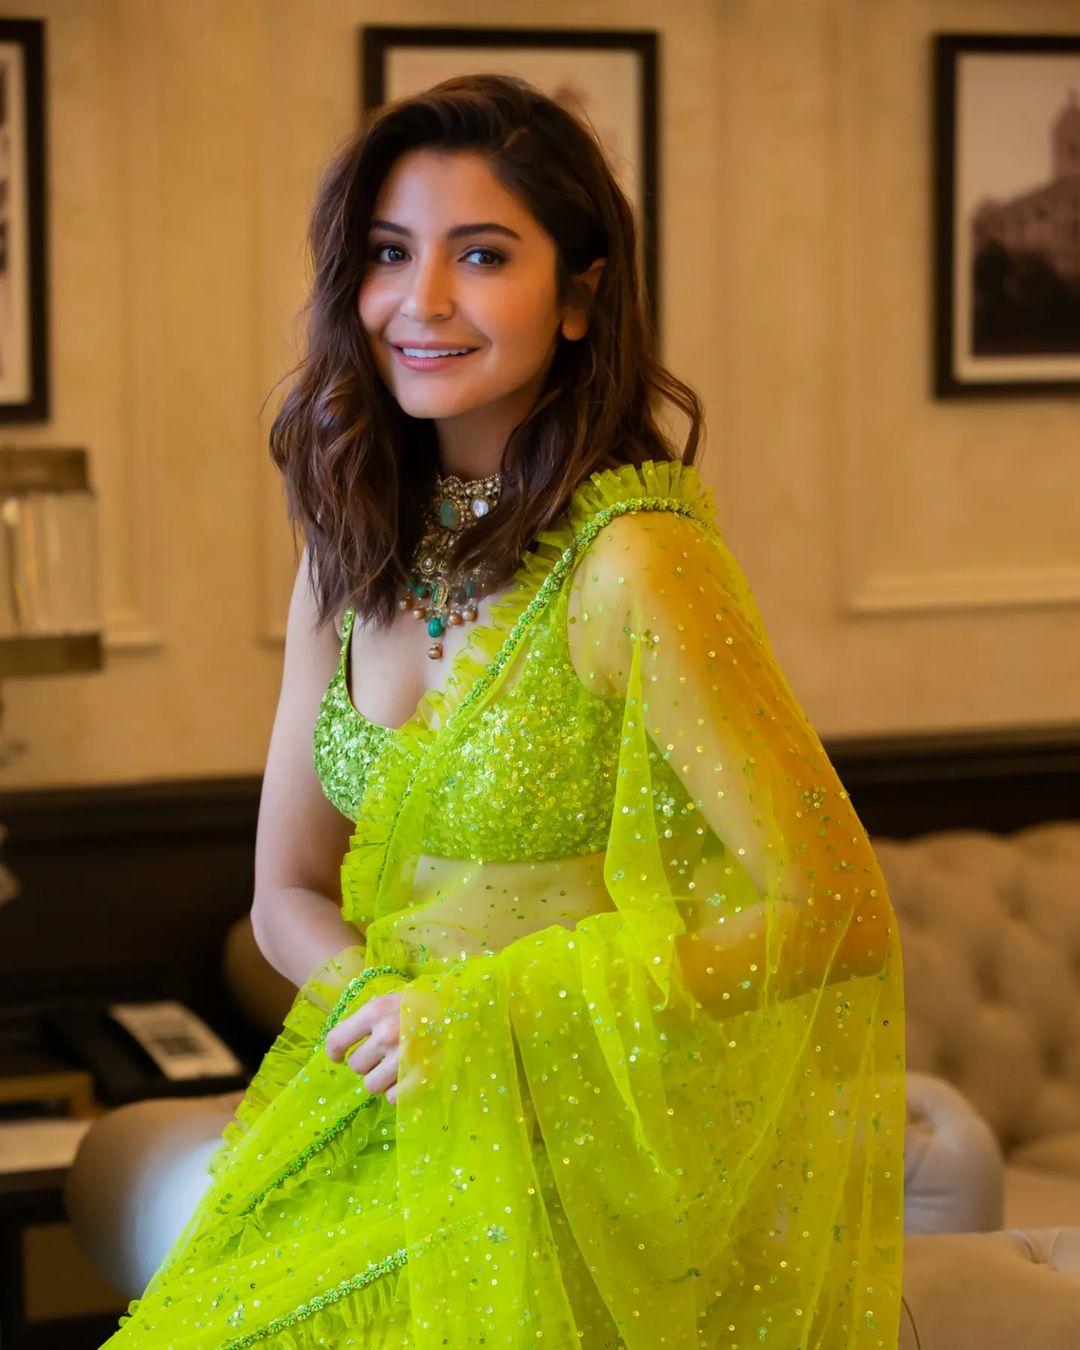 Anushka left her hair open and opted for an intricate necklace, ditching earrings to complete her look